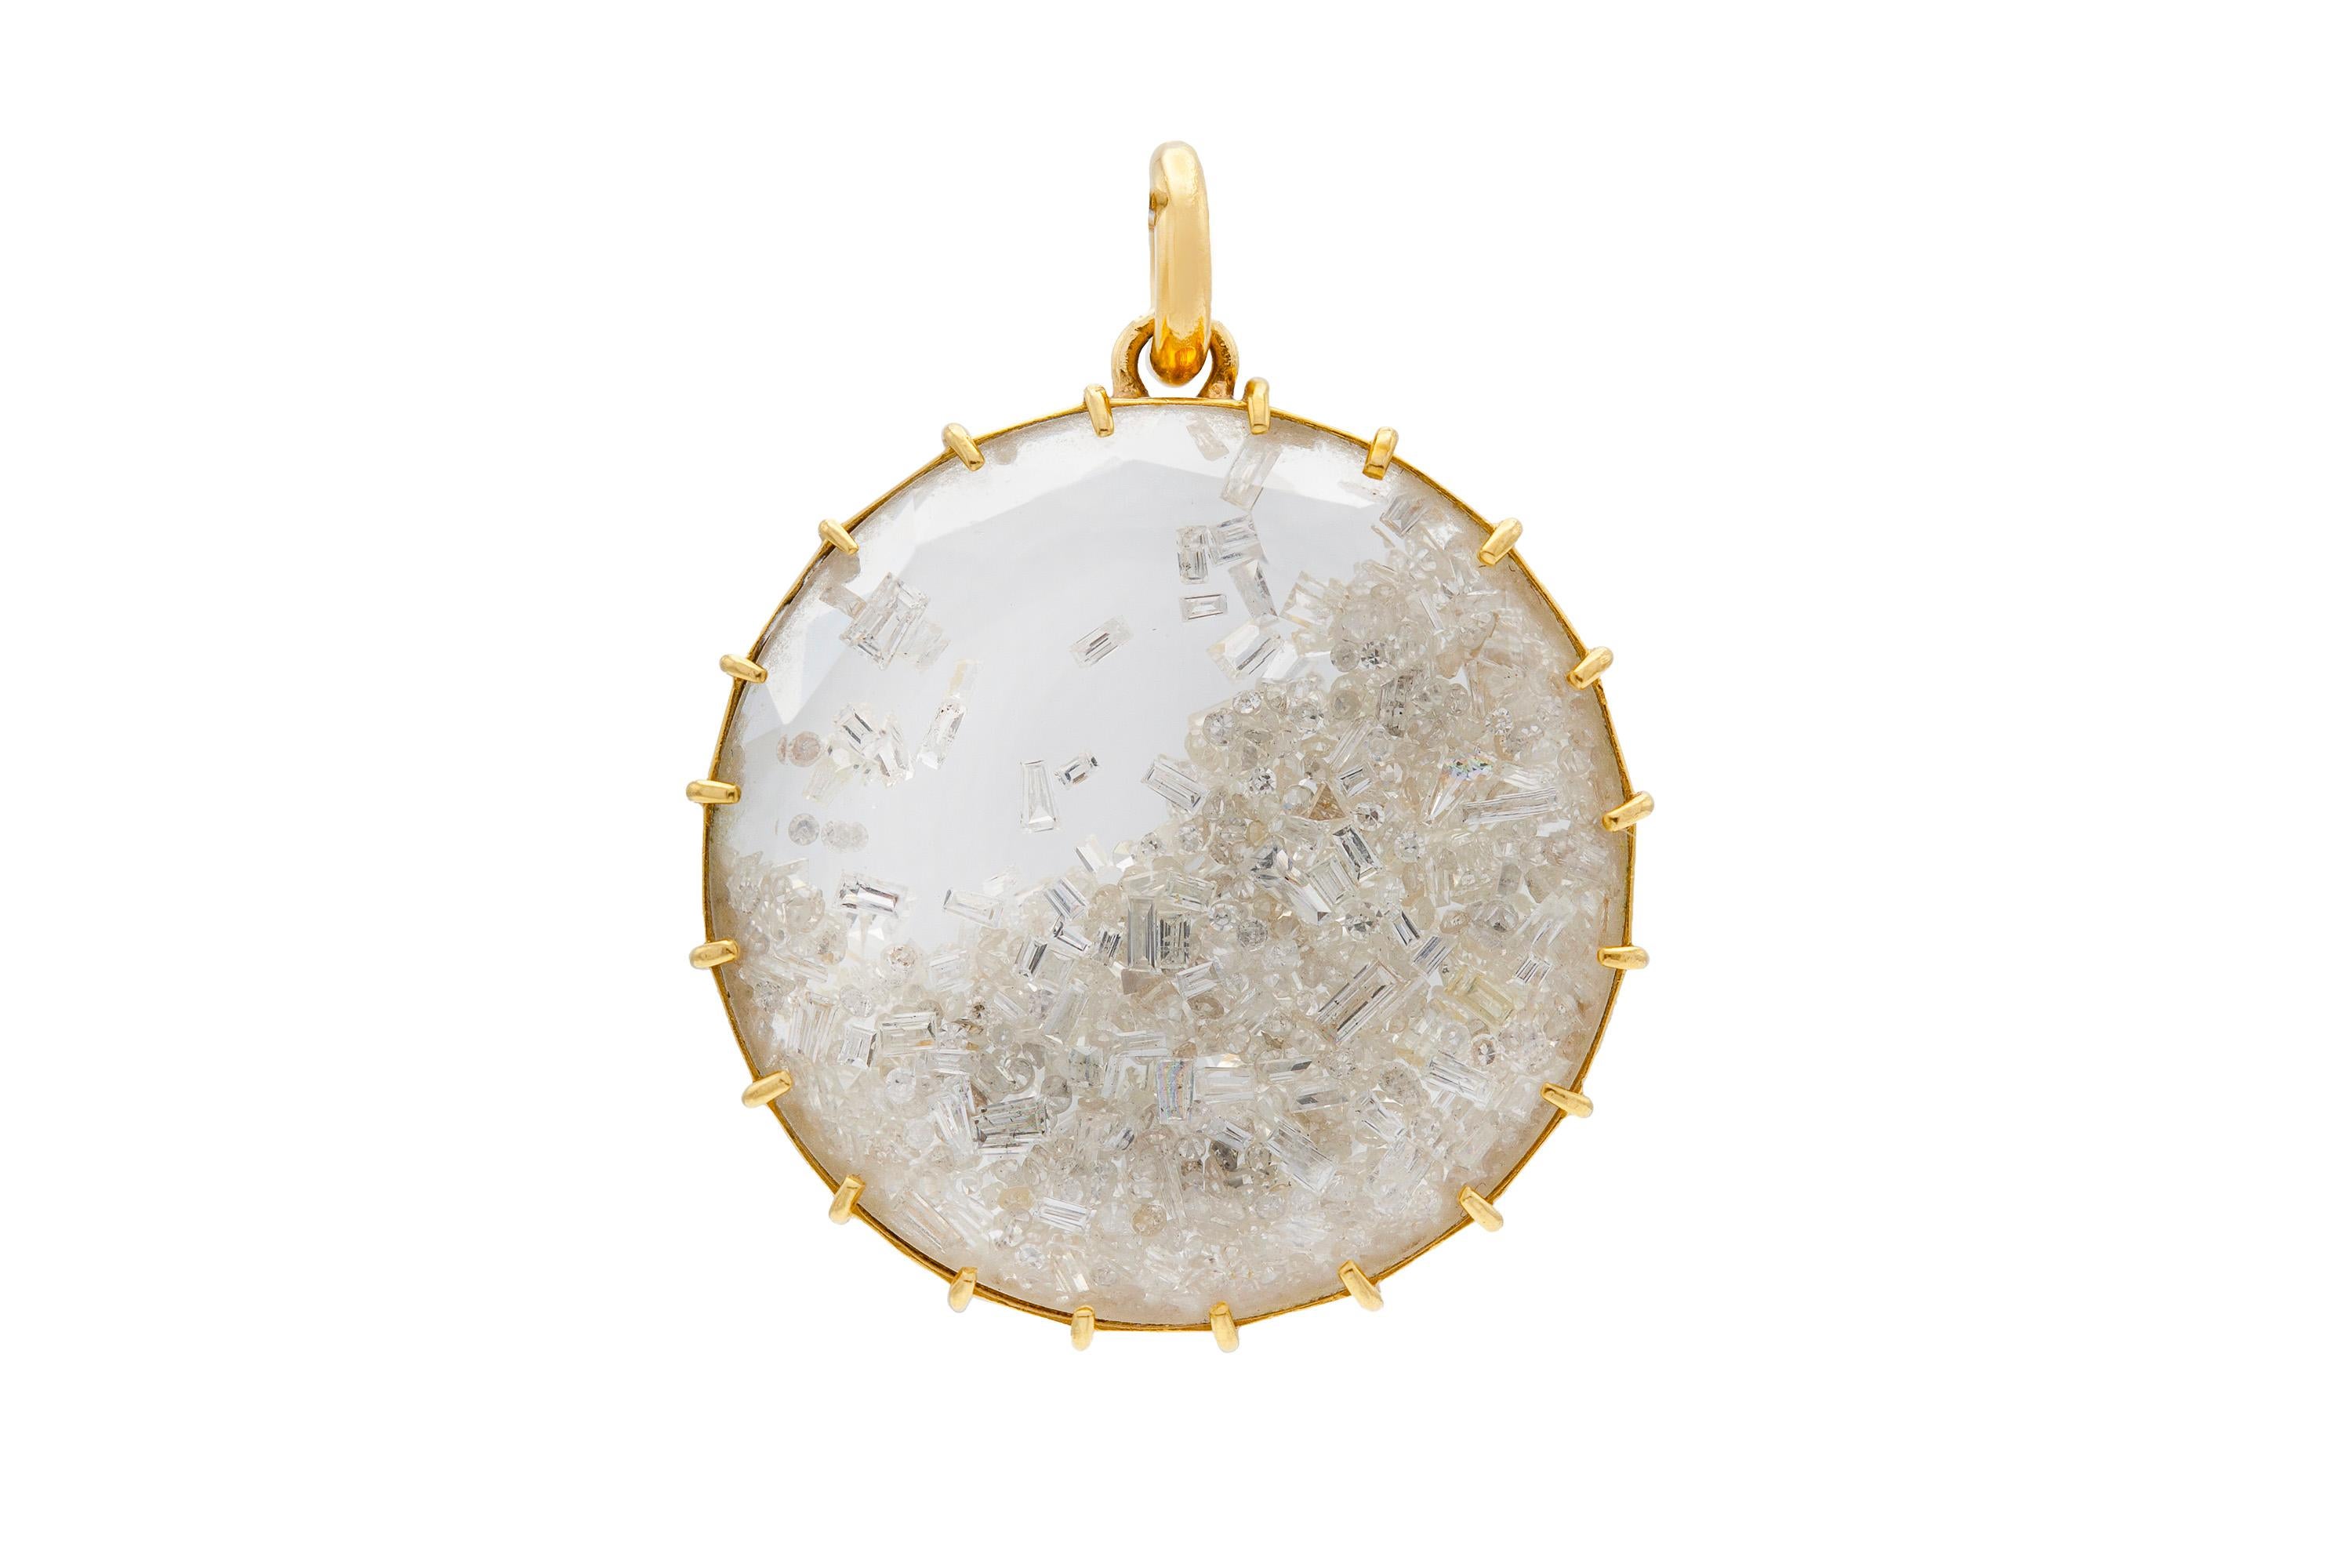 Circular pendant with loose diamonds inside weighing approximately 4.50 carats total, finely crafted in 18K yellow gold with original chain. From Renee Lewis' 